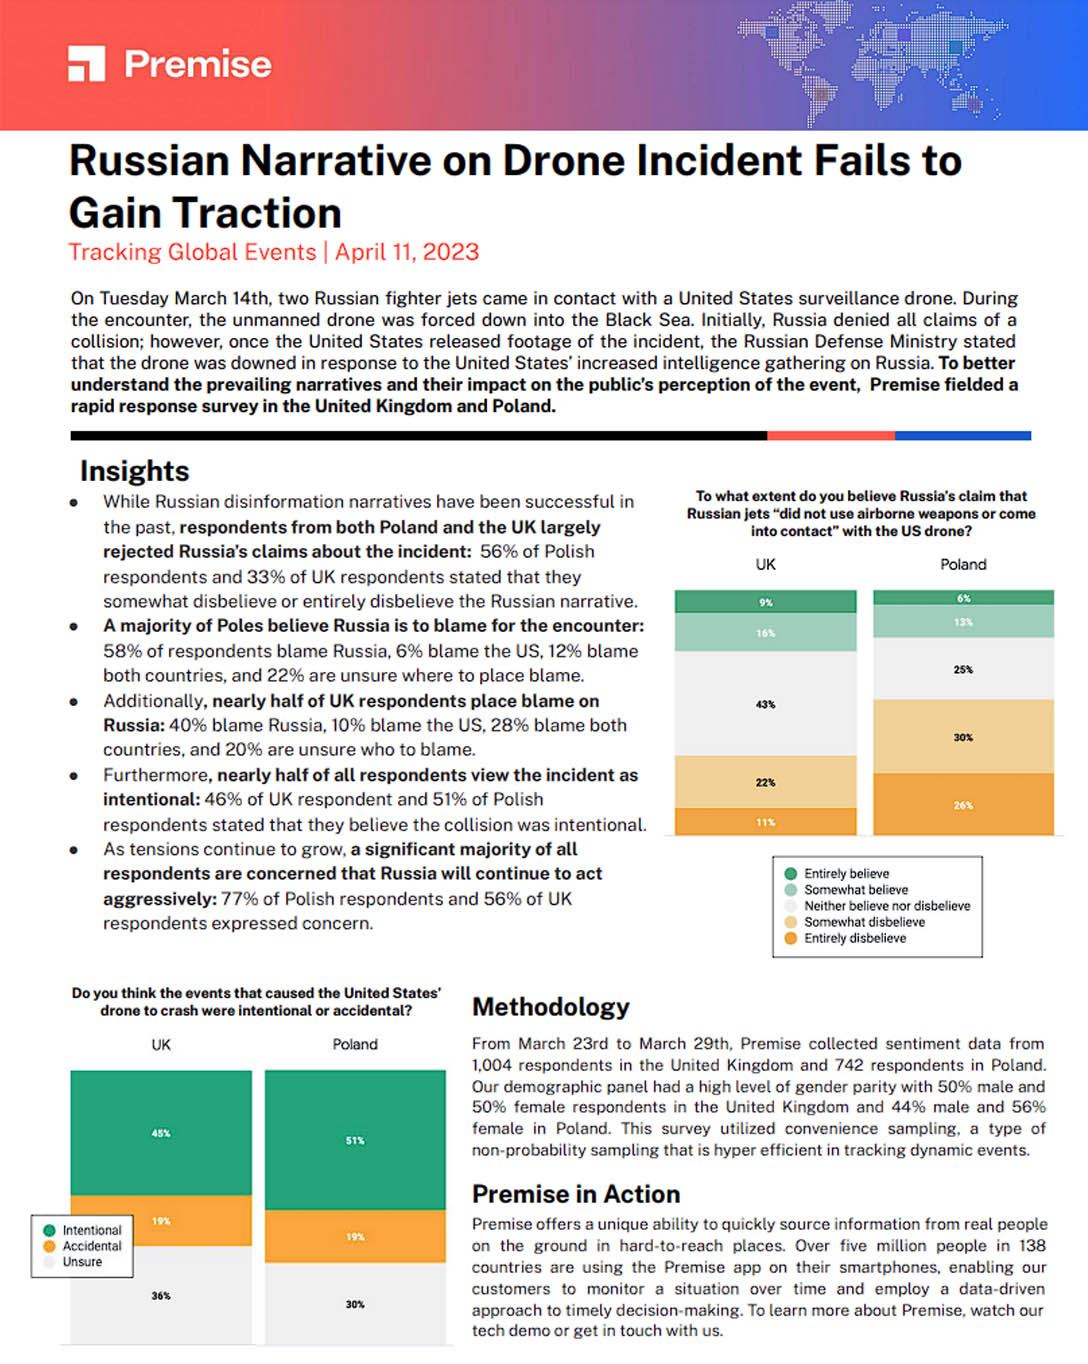 Russian Narrative on Drone Incident Fails to Gain Traction